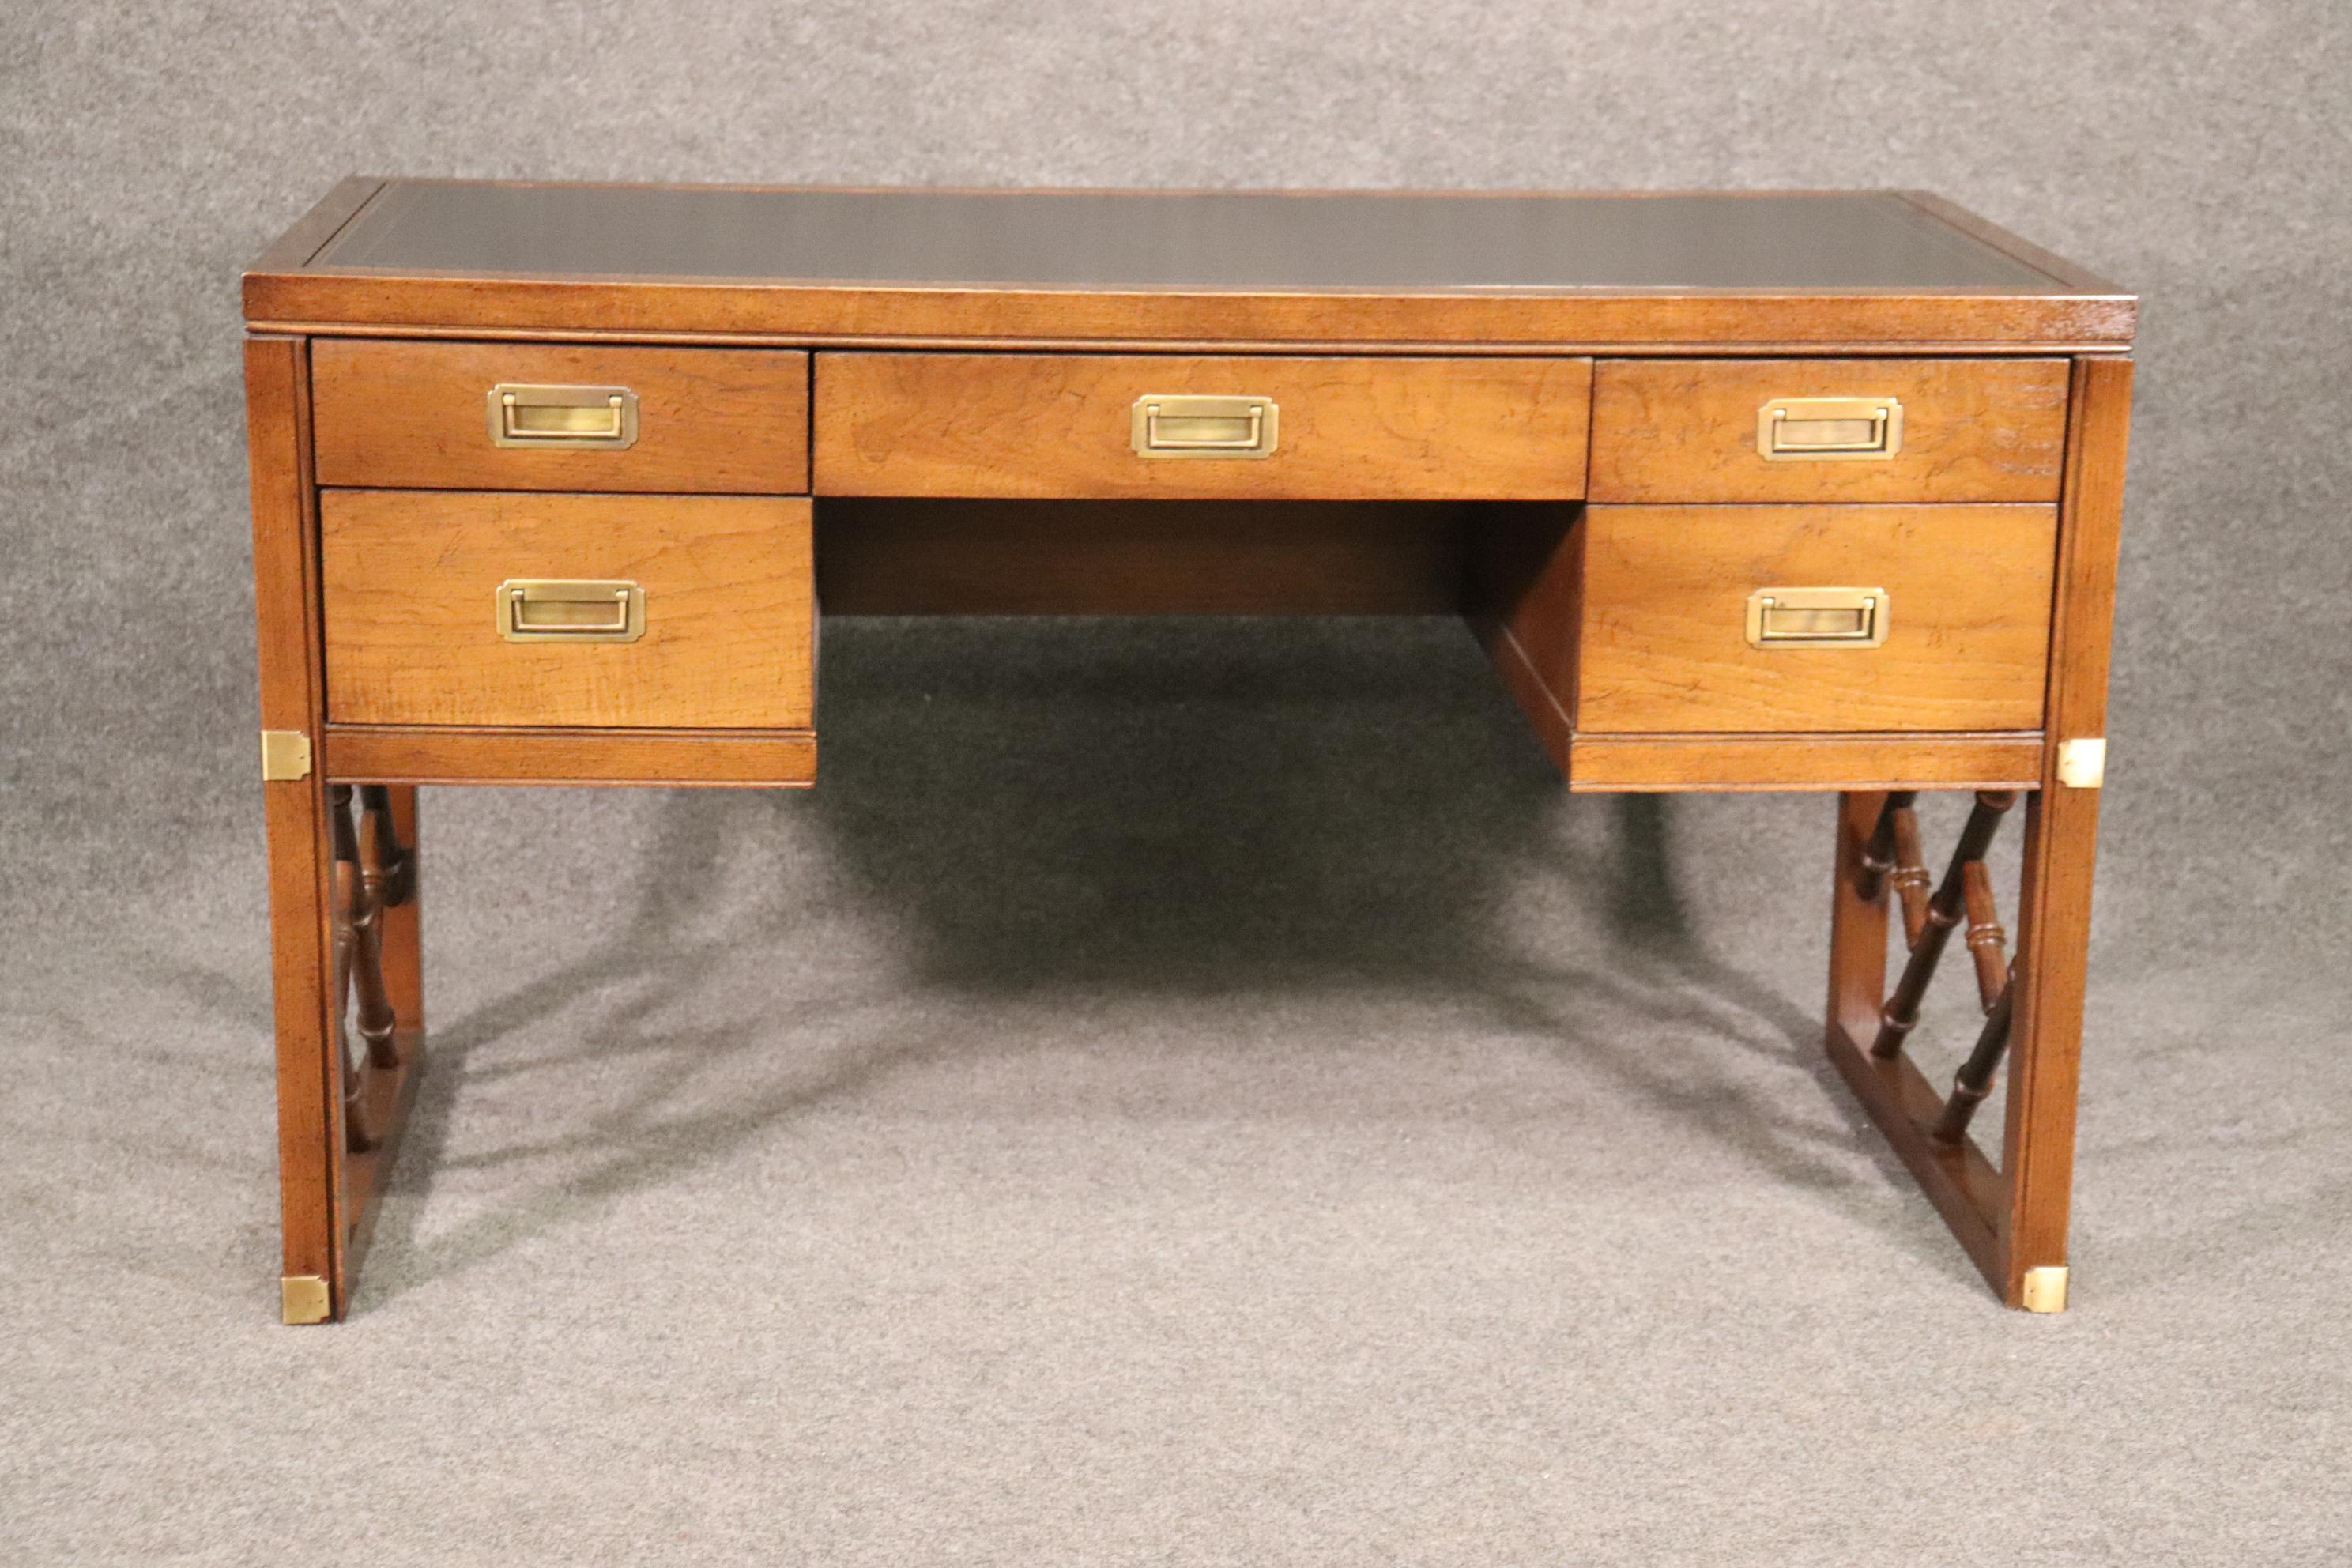 This is a beautiful desk in good condition. The desk is 50 inches wide x 24 inches deep x 29 tall. The desk has a little bit of scratches to the leather top.